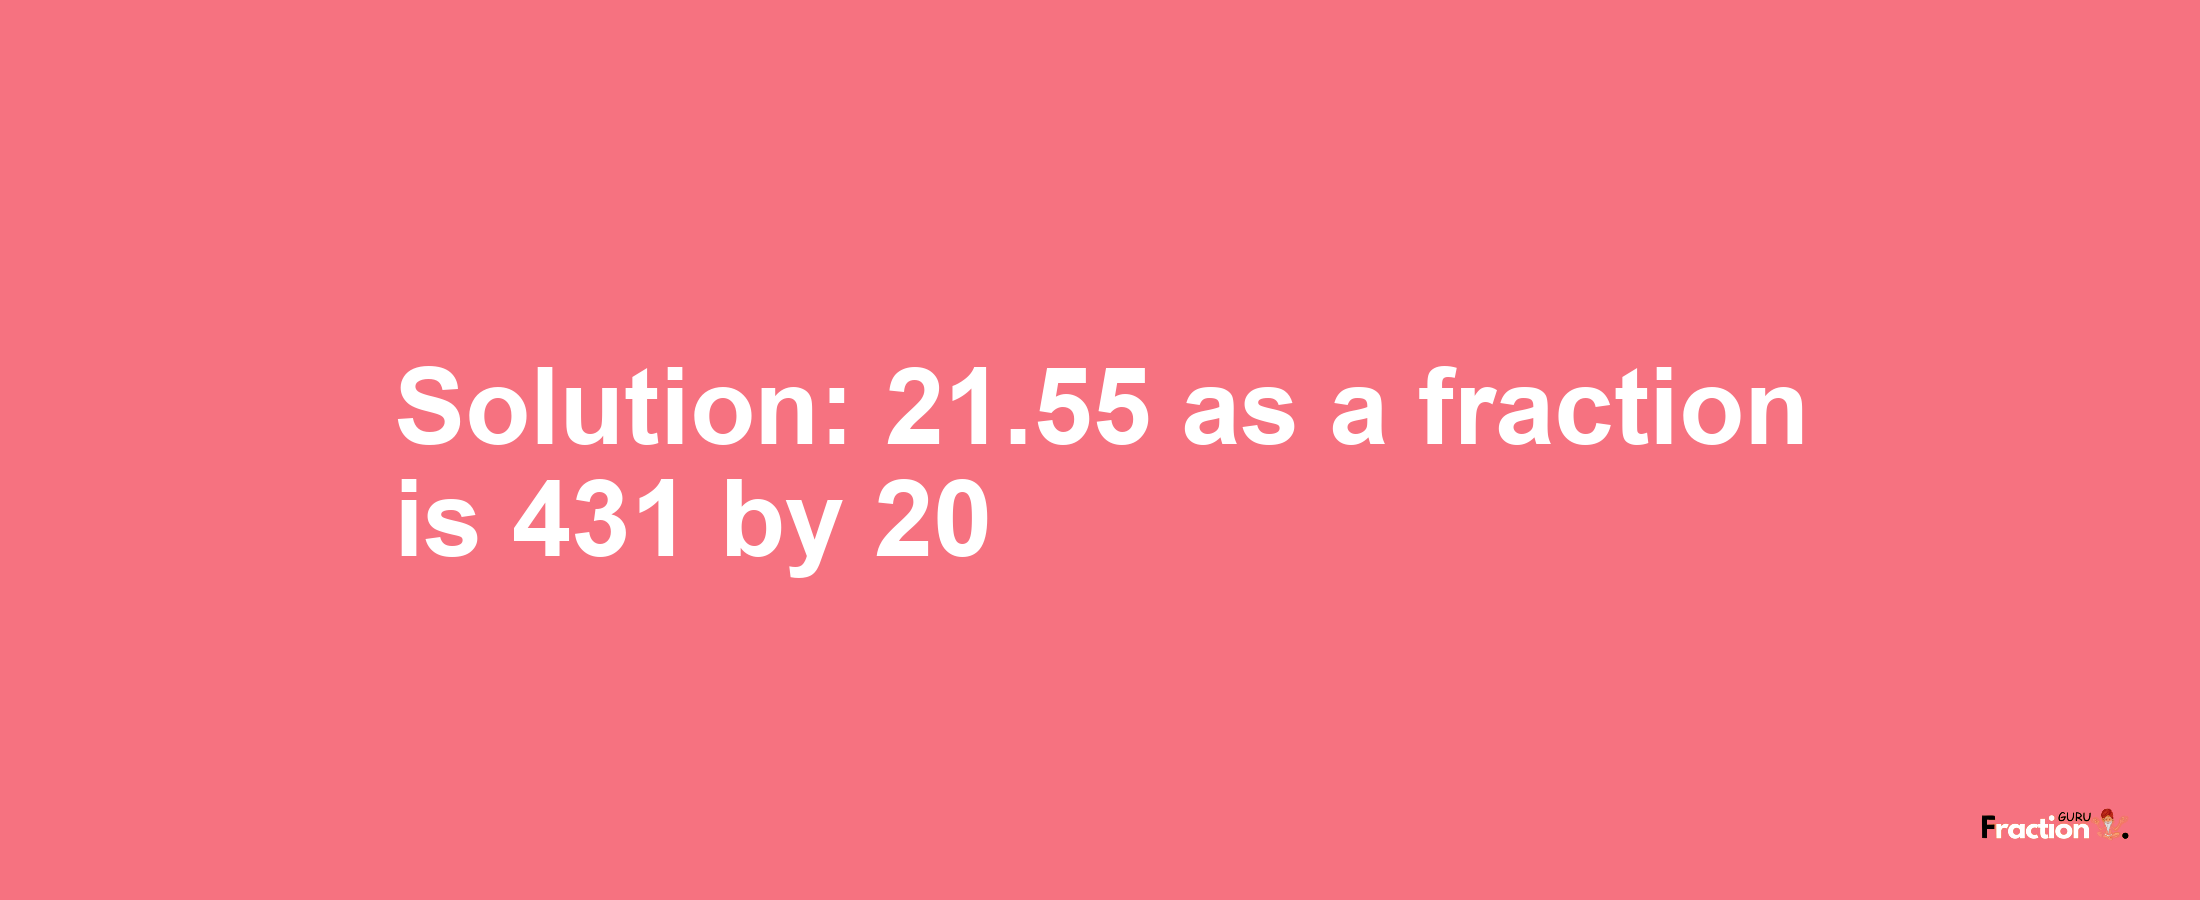 Solution:21.55 as a fraction is 431/20